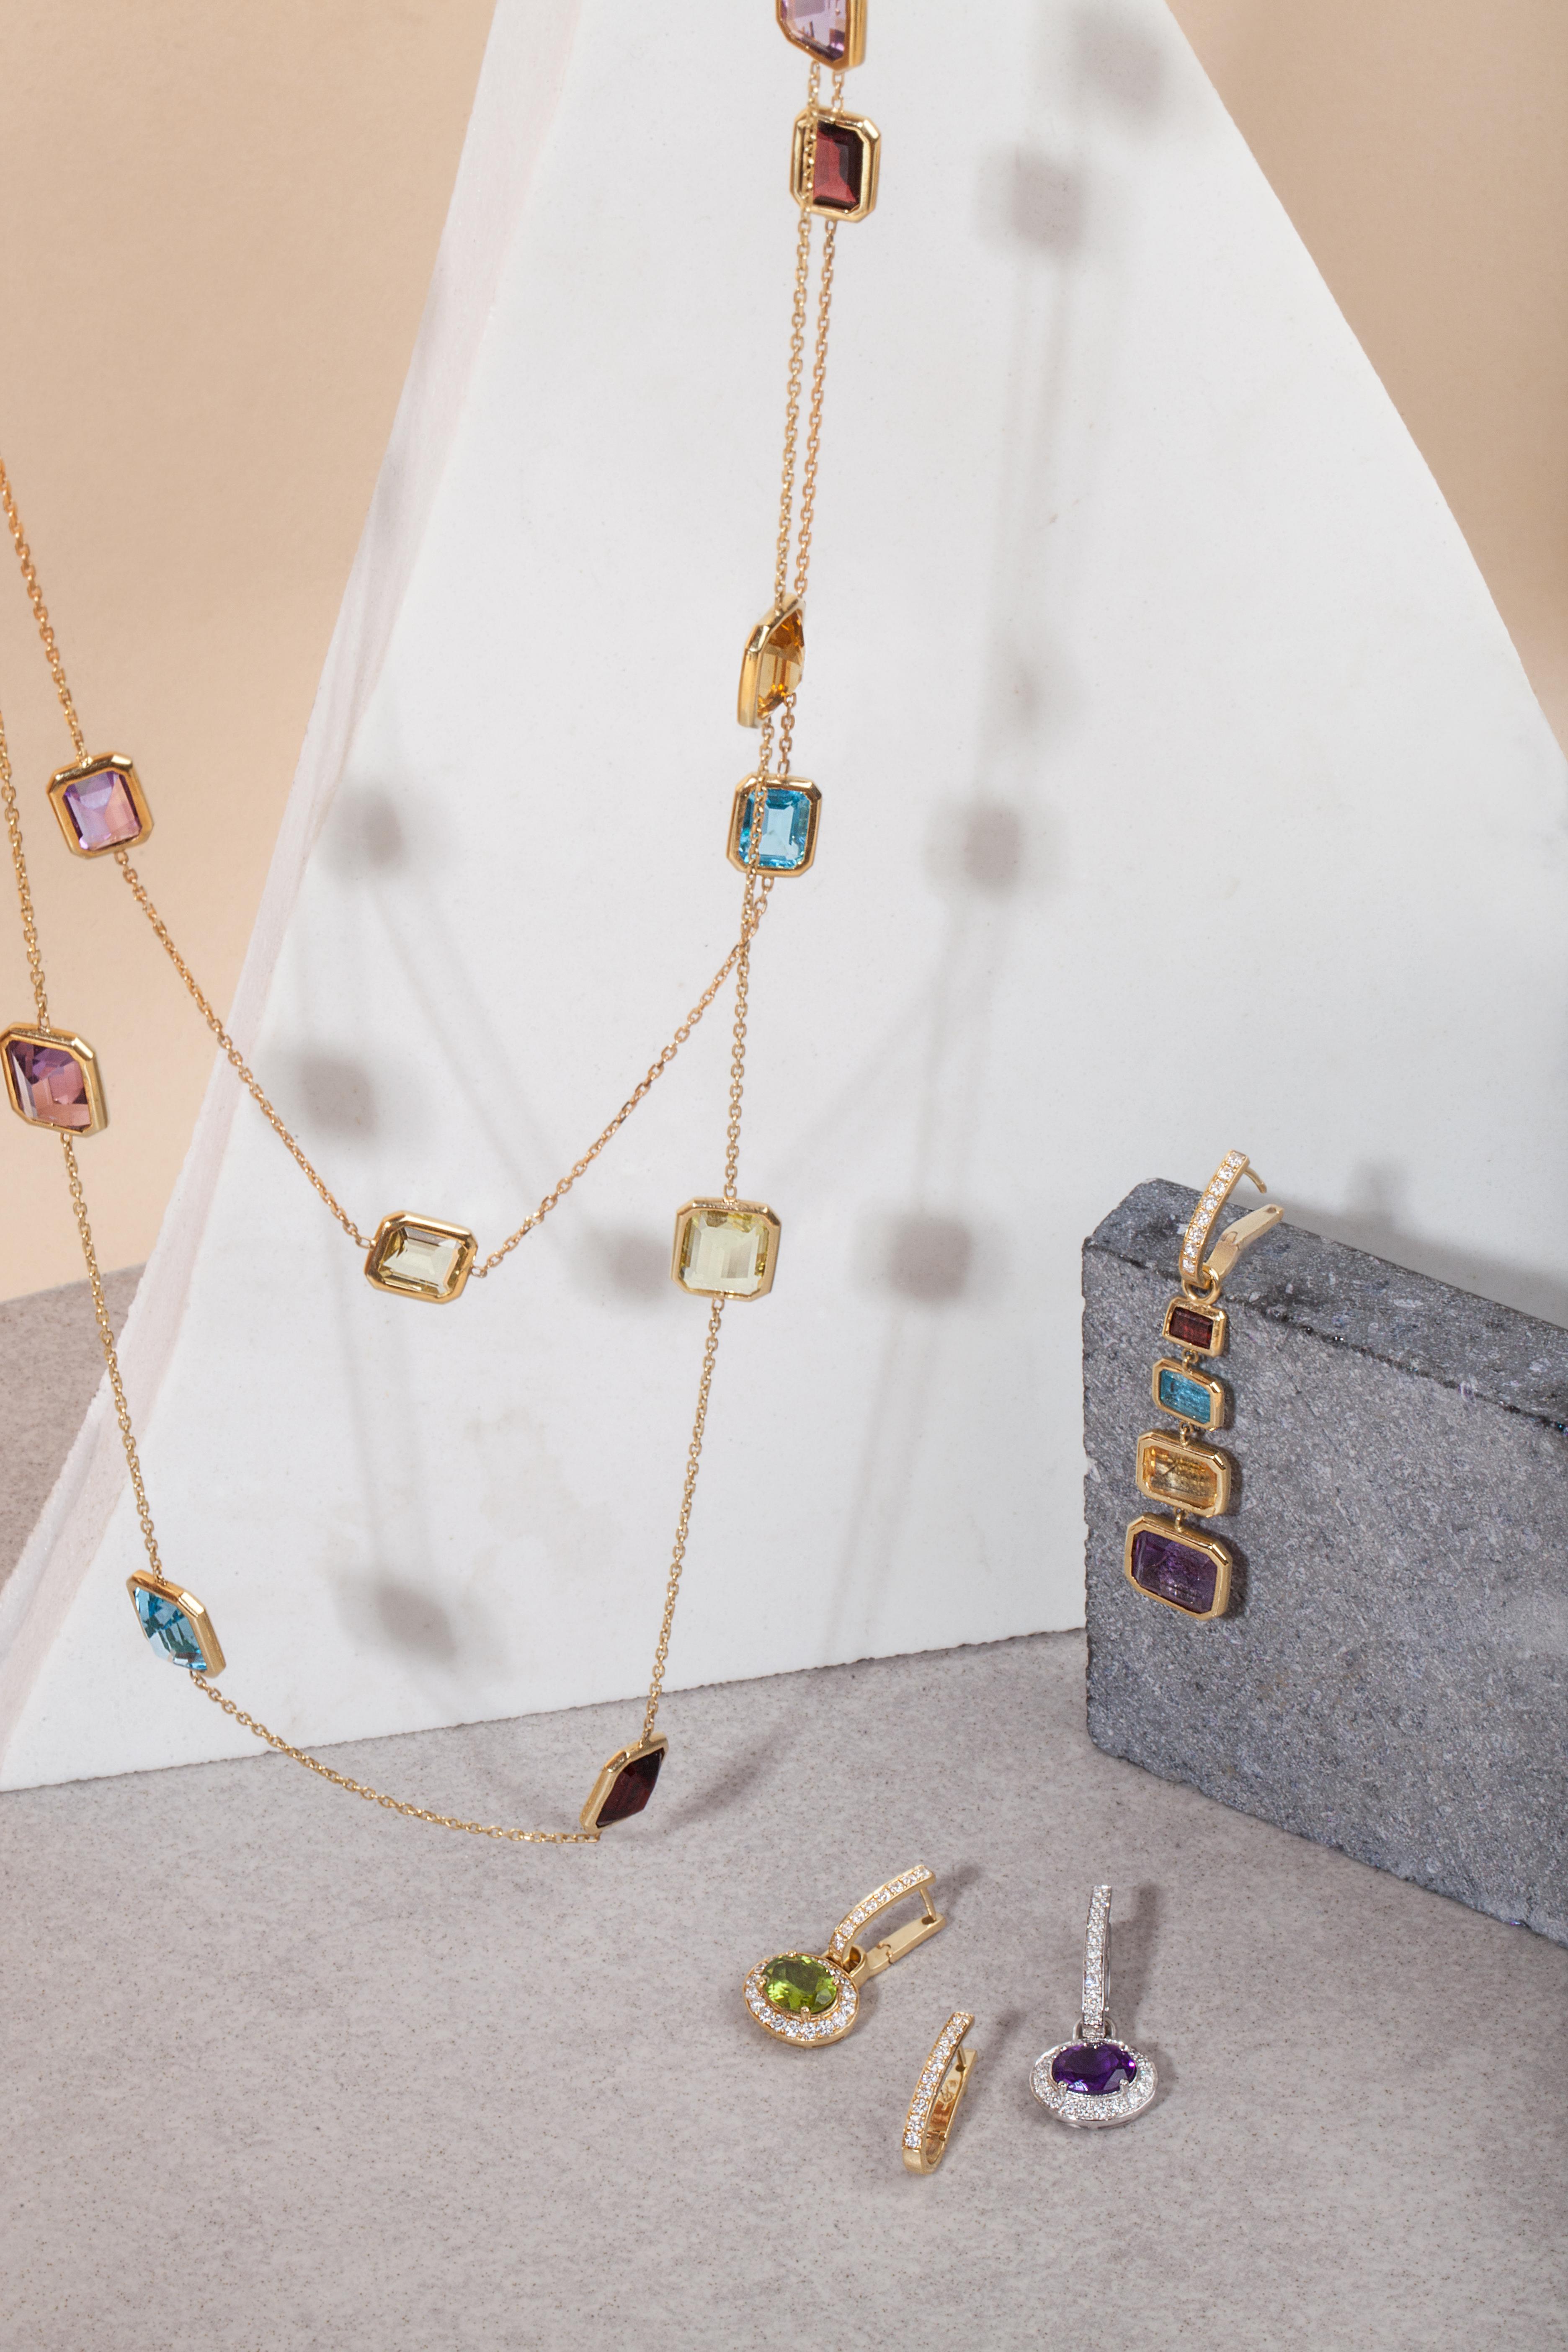 A necklace that captures and radiates daylight through its stones 
18K yellow gold Amethyst: 
– Weight (total): 8.47 carats 
– Cut: Emerald 
Citrin: 
– Weight (total): 6.81 carats 
– Cut: Emerald 
Garnet: 
– Weight (total): 8.83 carats 
– Cut: